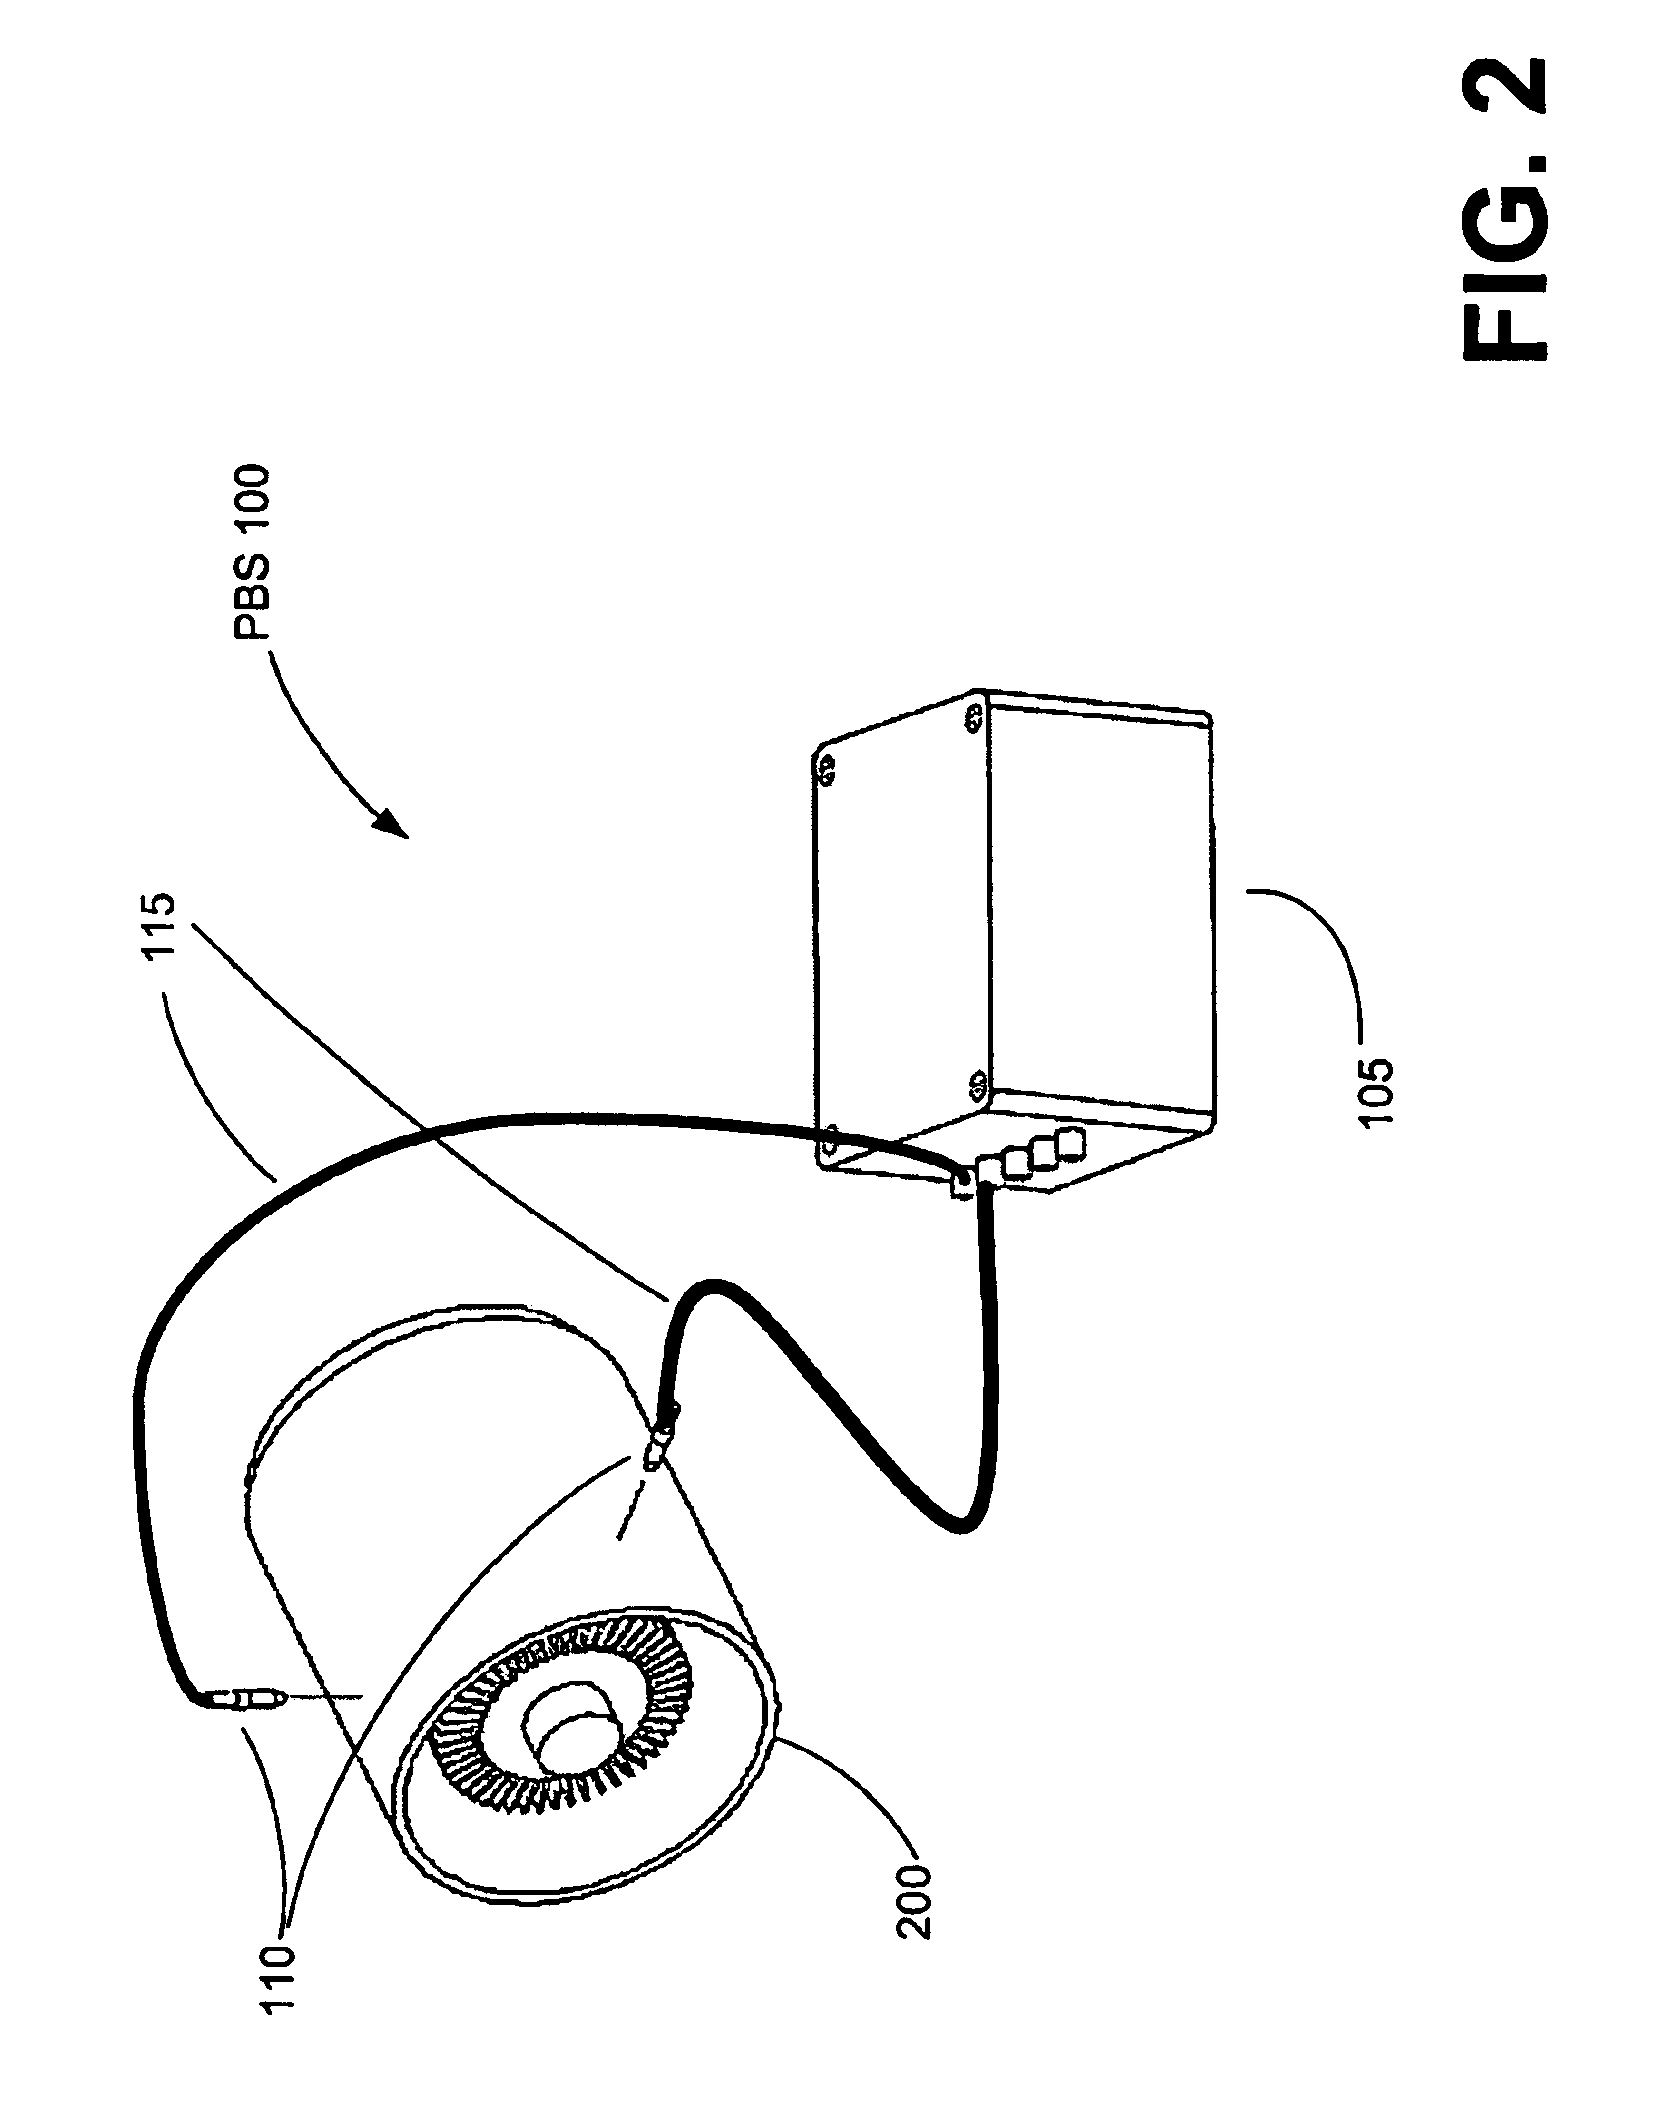 Method and system for calibration of a phase-based sensing system